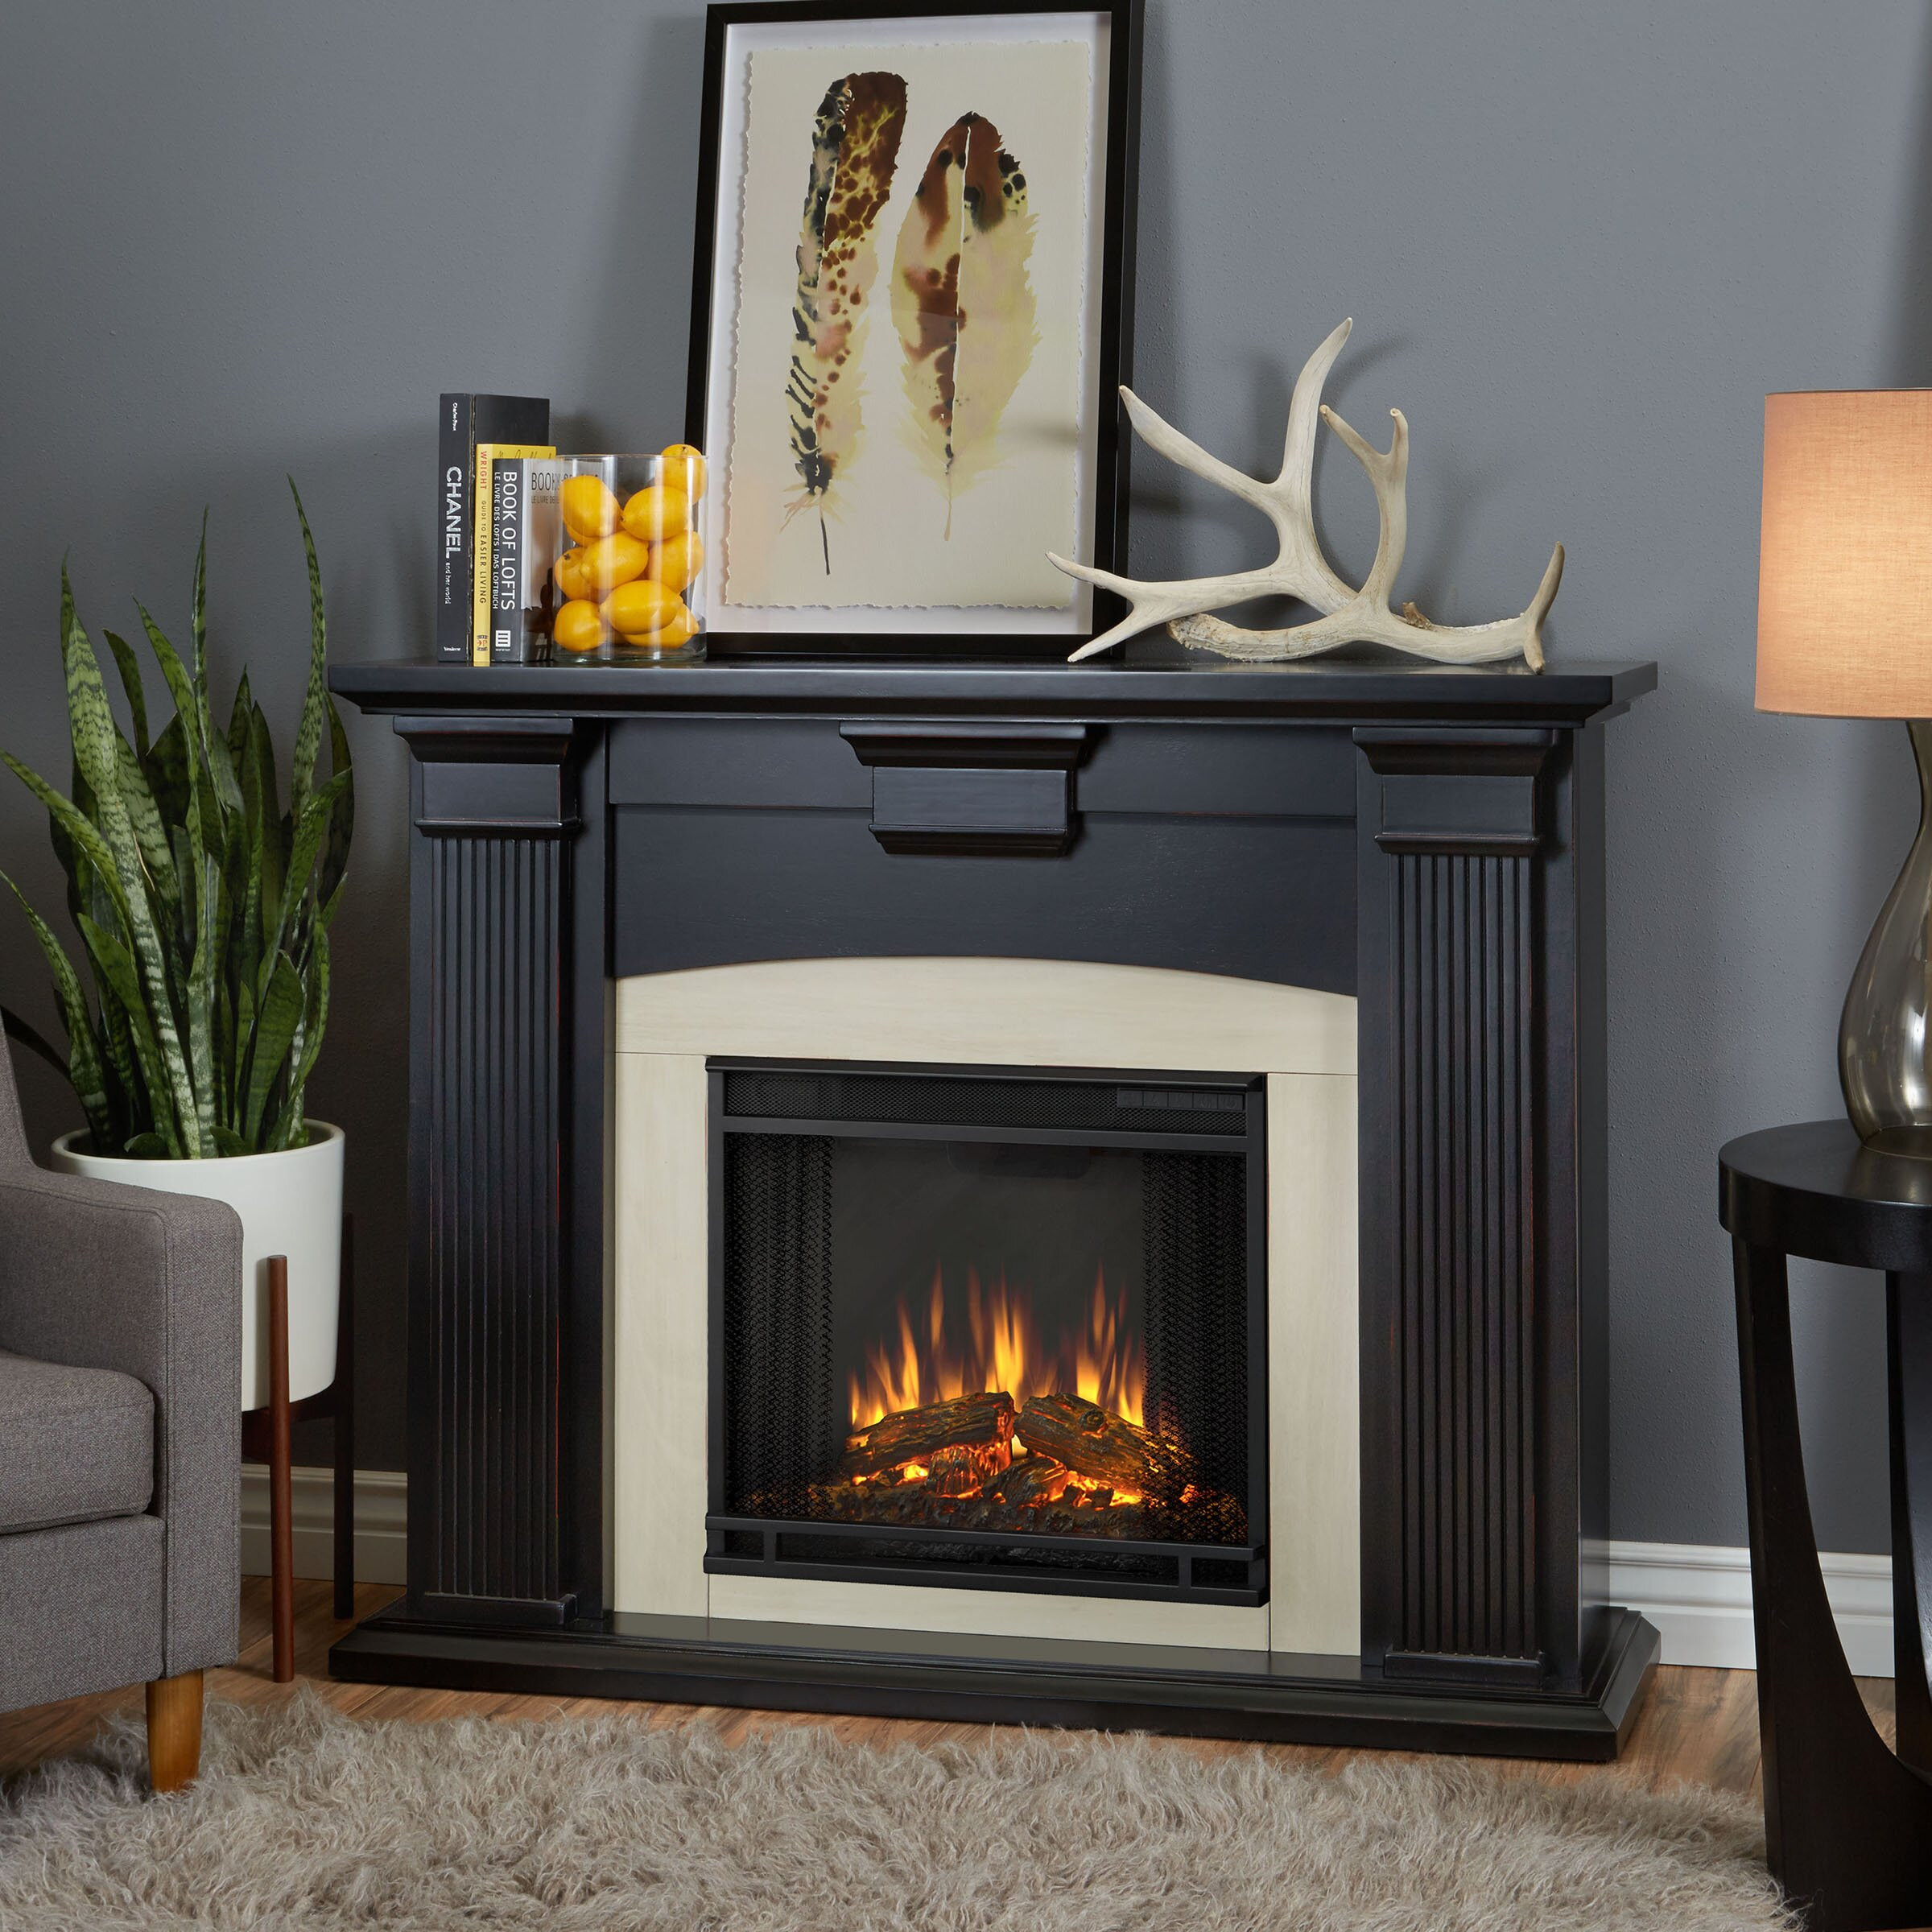 Real Flame Electric Fireplace Reviews
 Real Flame Adelaide Electric Fireplace & Reviews